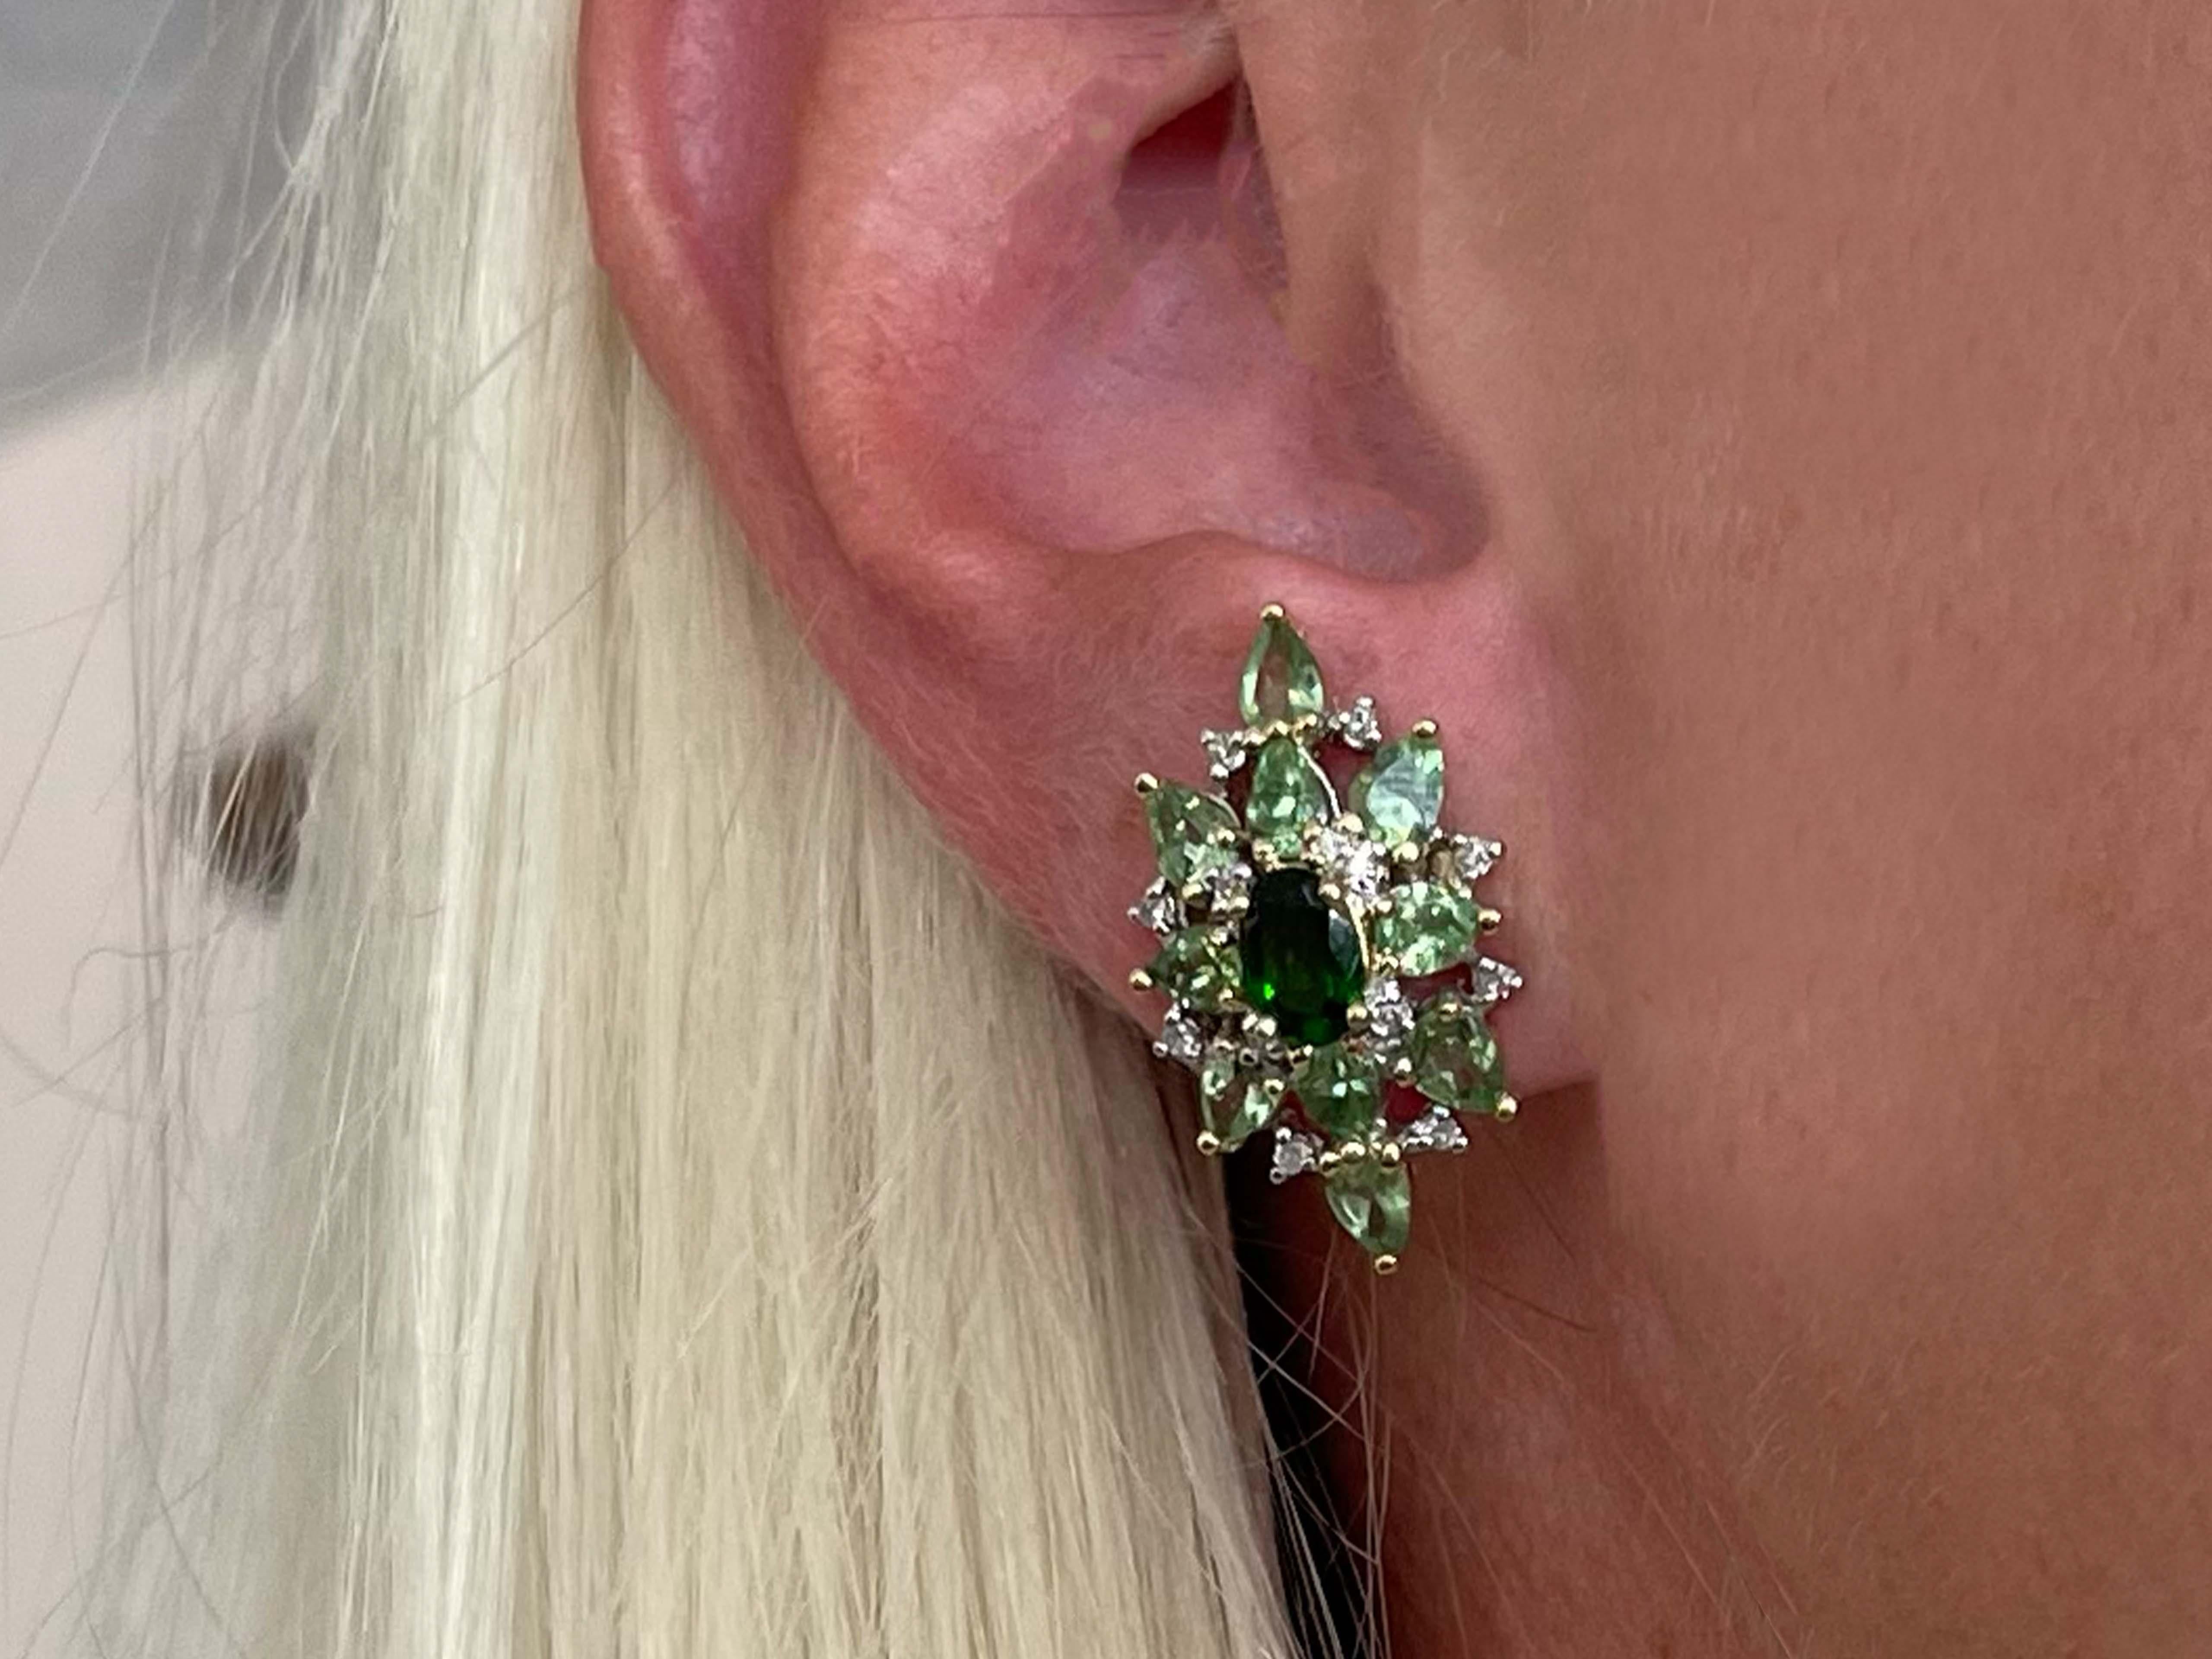 Specifications:

Metal: 10k Yellow Gold

Total Weight: 4.7 Grams
​
​Green Peridot Count: 20  pear shaped 
​
​Green Garnet Count: 2 oval shaped
​
​Diamond Carat Weight: 0.10
​
​Diamond Count: 24 round single cut
​
​Diamond Color: H-I
​
​Diamond